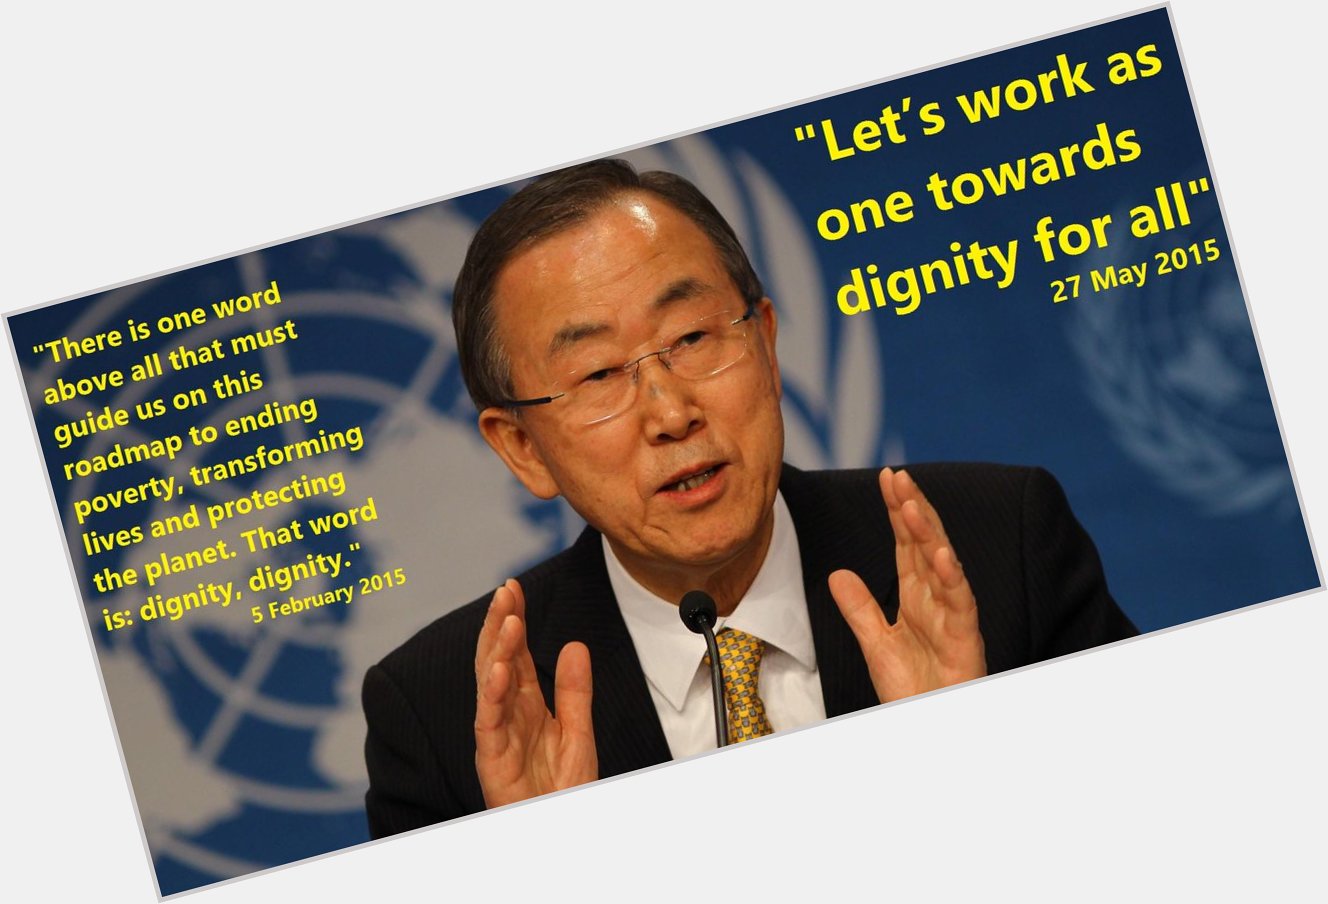 Happy Birthday to Ban Ki-Moon 2day! Take care of you Mister Secretary General! You\re doing a great job! 